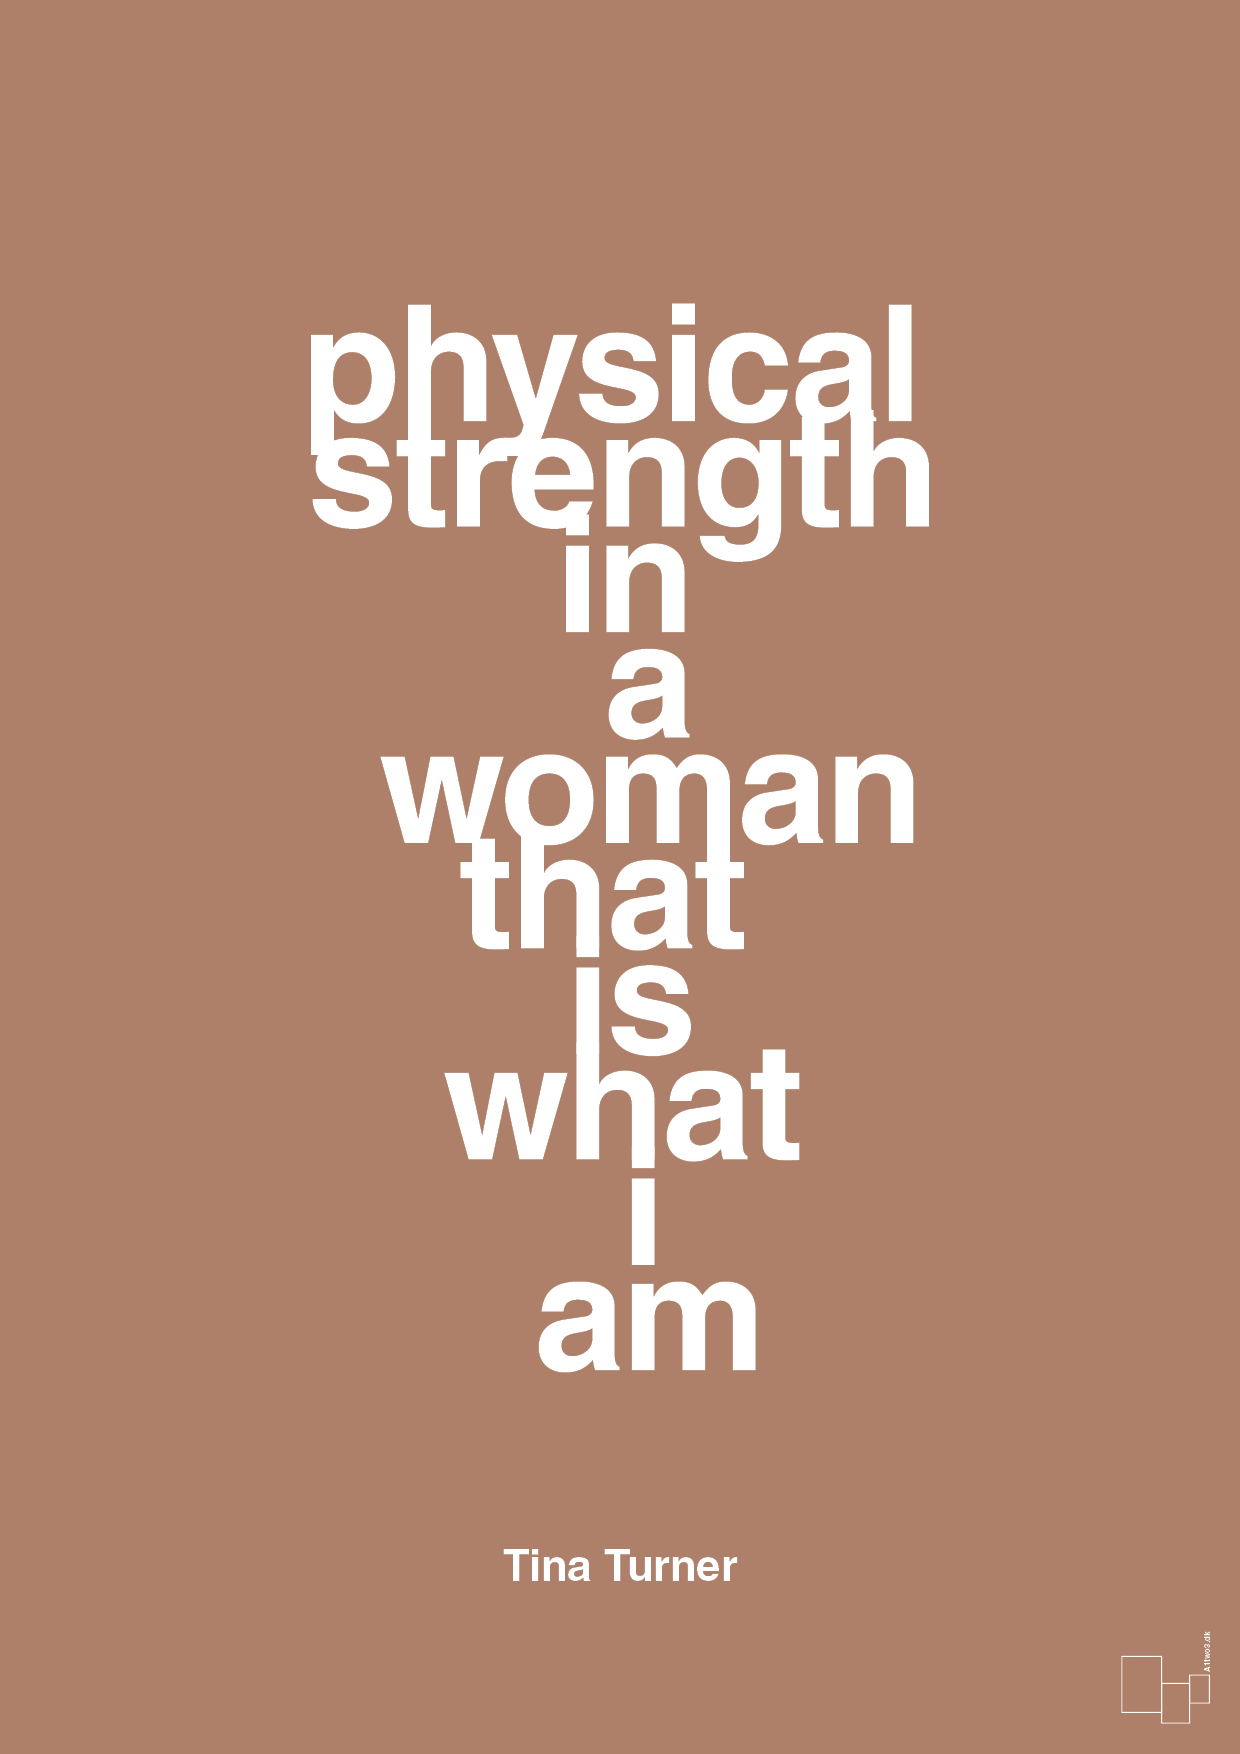 physical strength in a woman that’s what I am - Plakat med Citater i Cider Spice